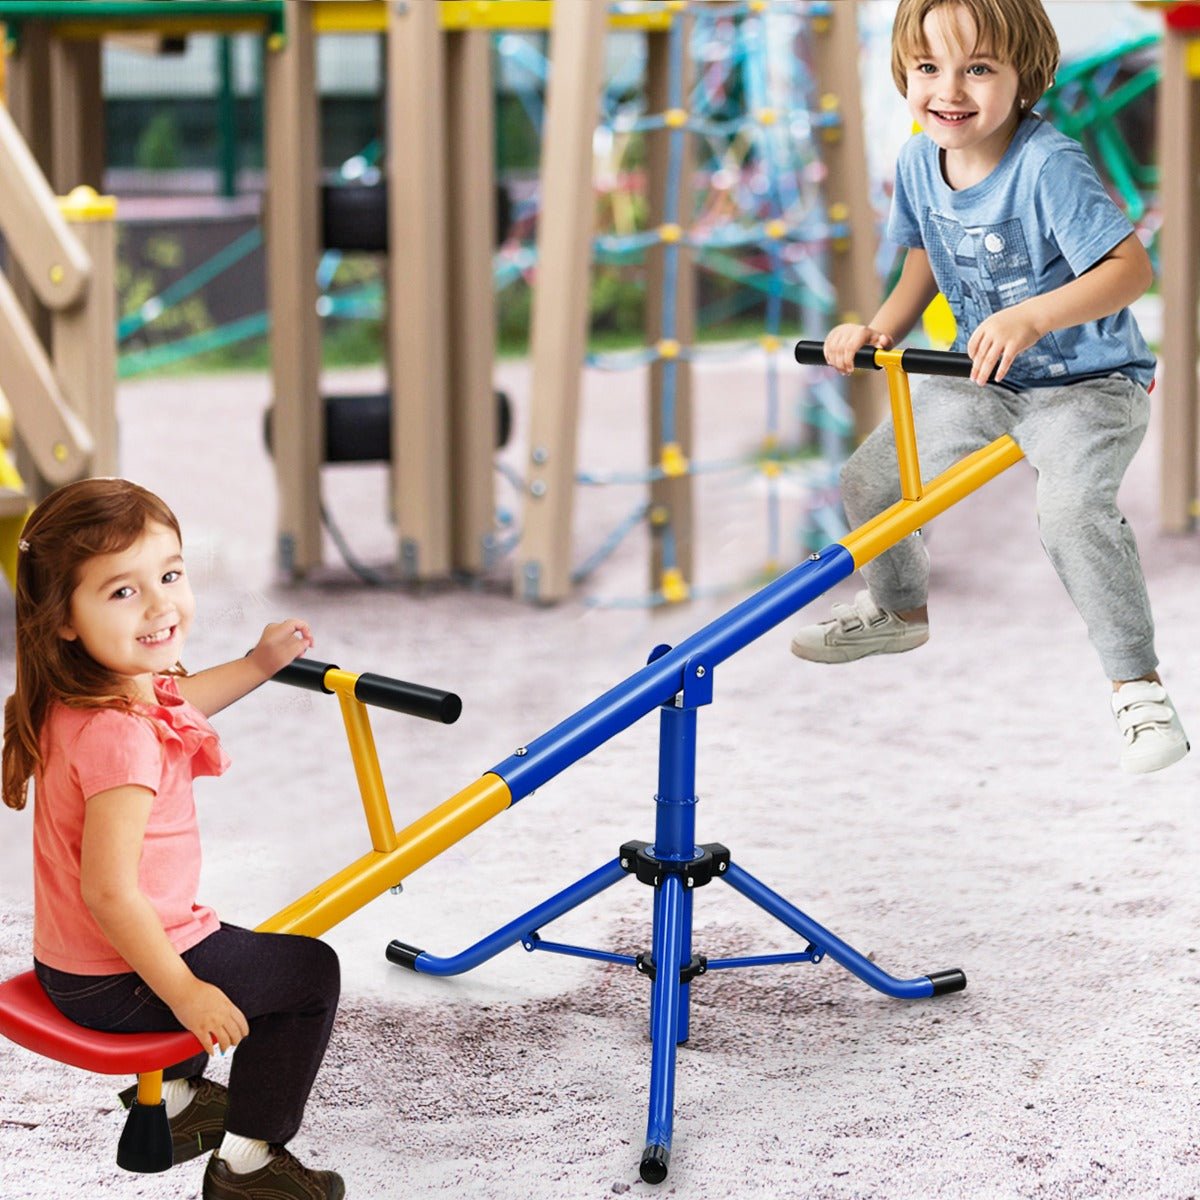 Quality Spinning Seesaw with Stopper Legs - Buy Now!